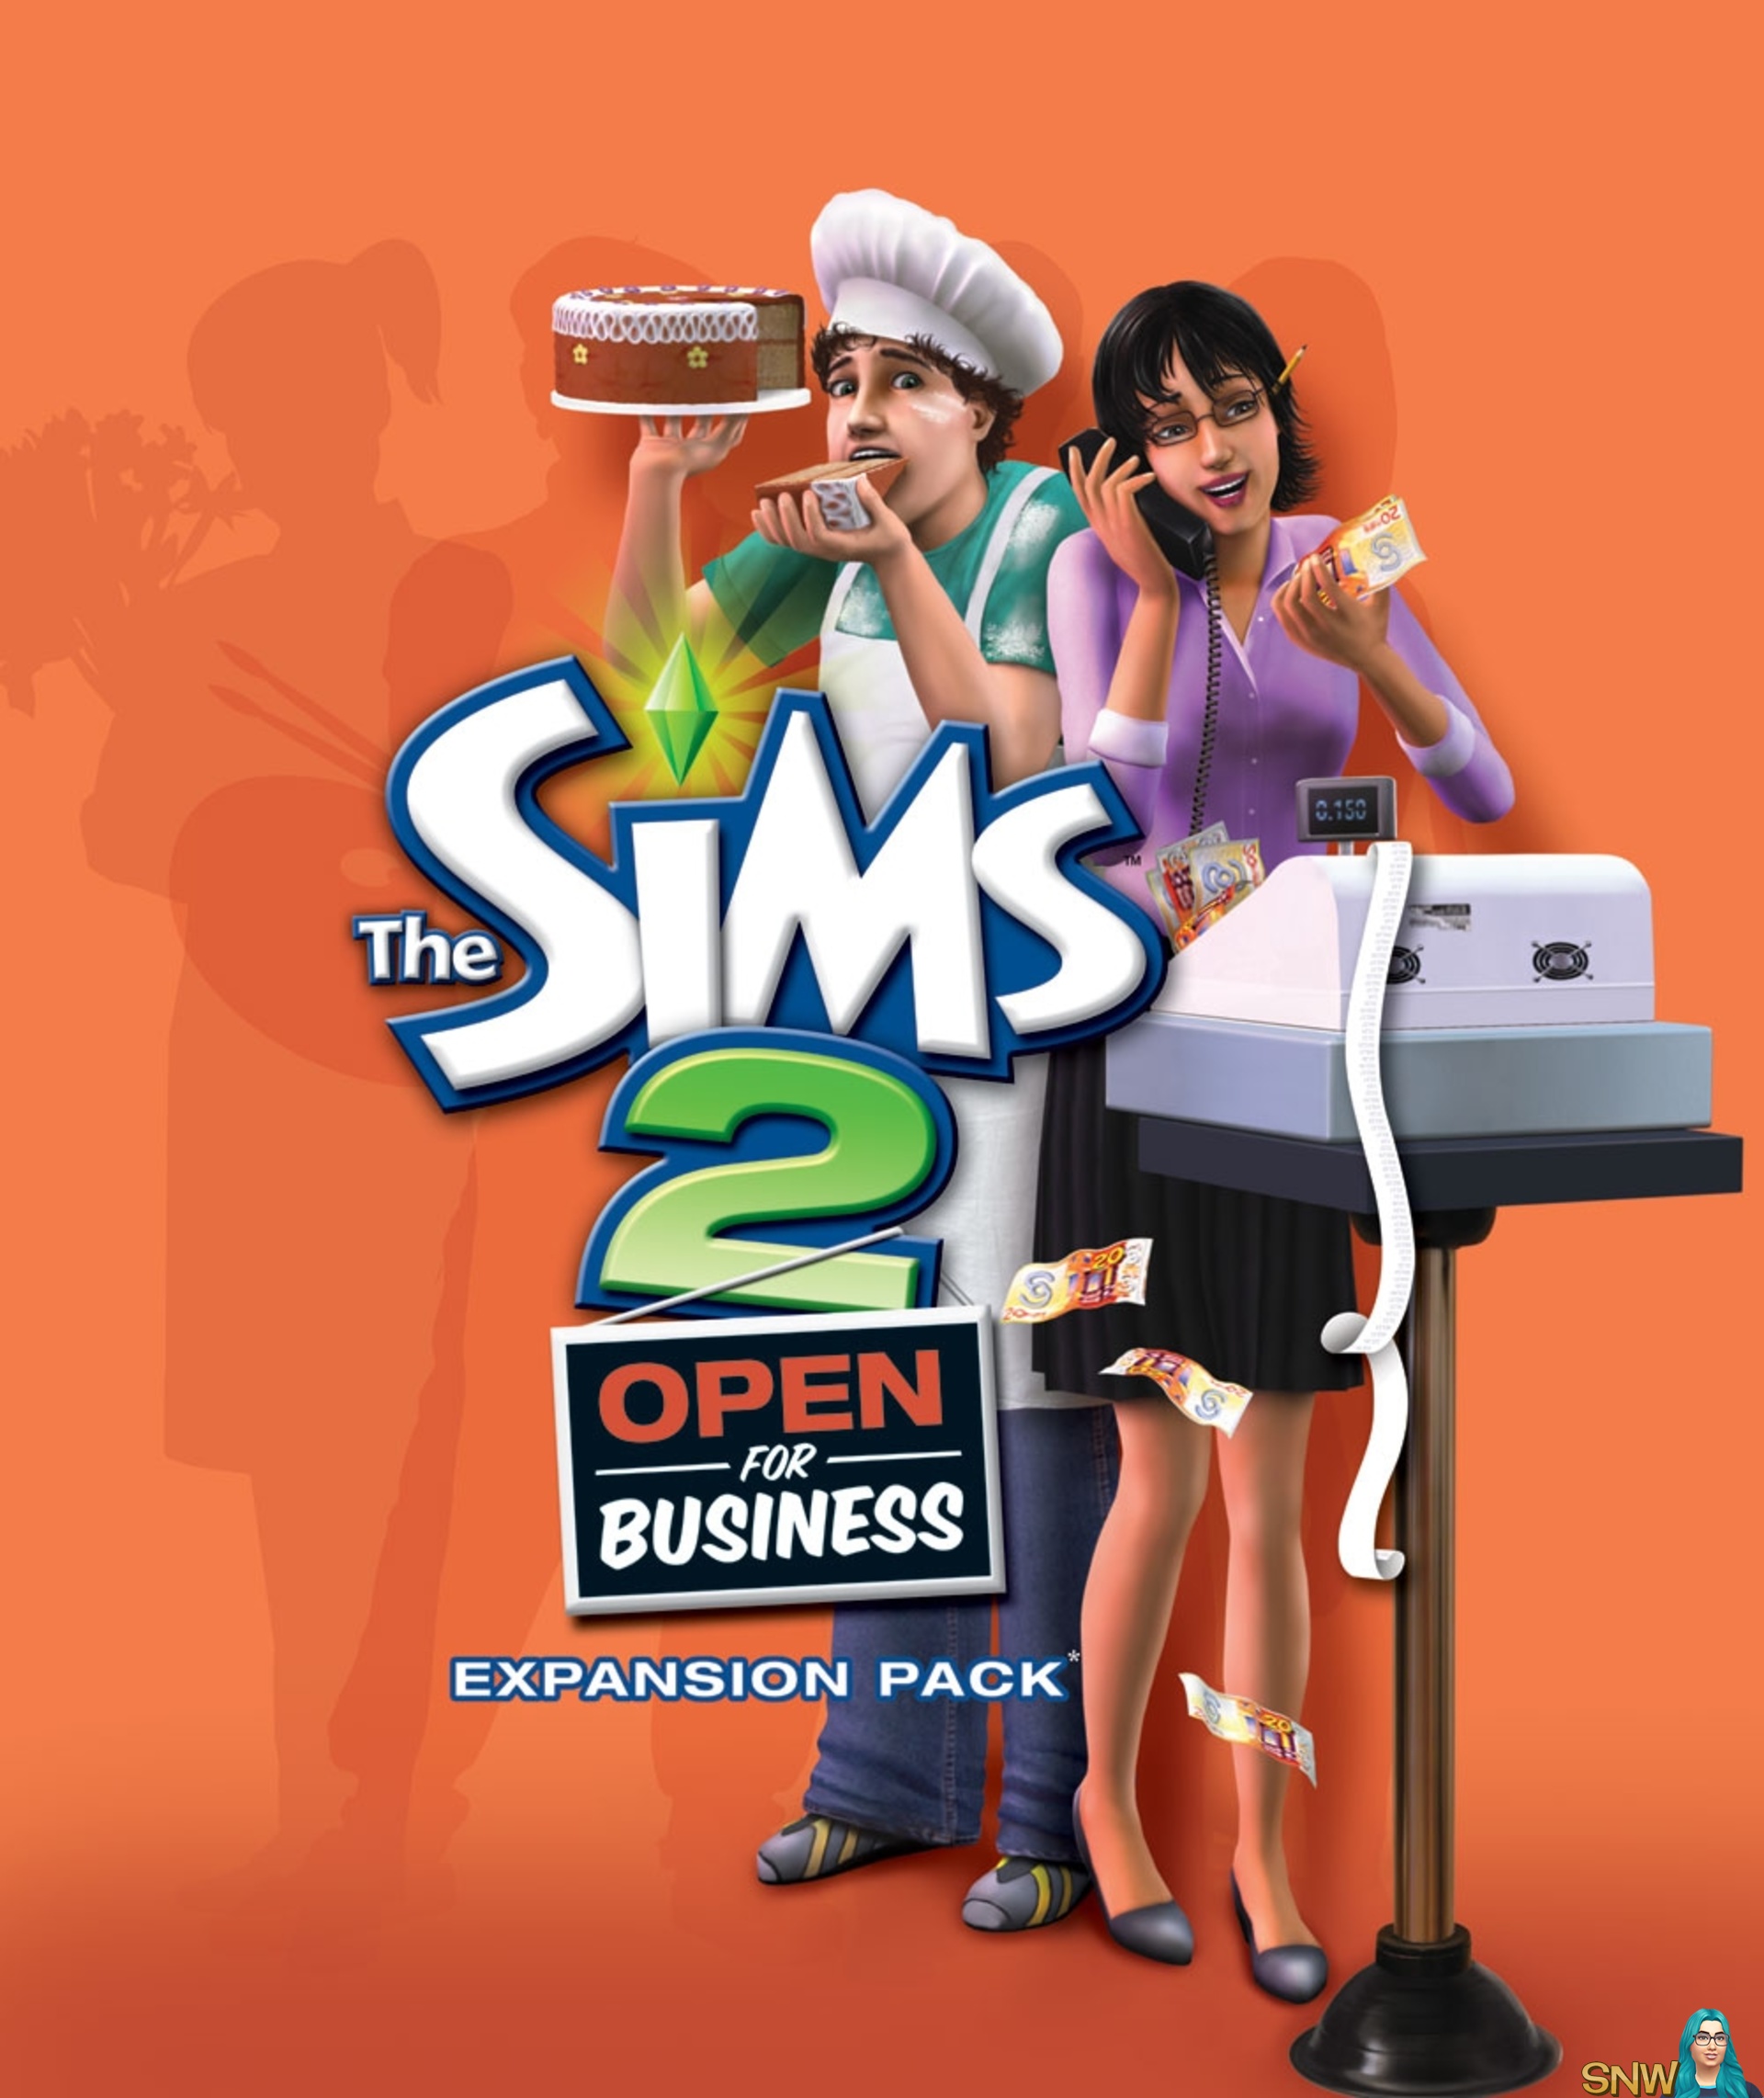 sims 2 pc add ons